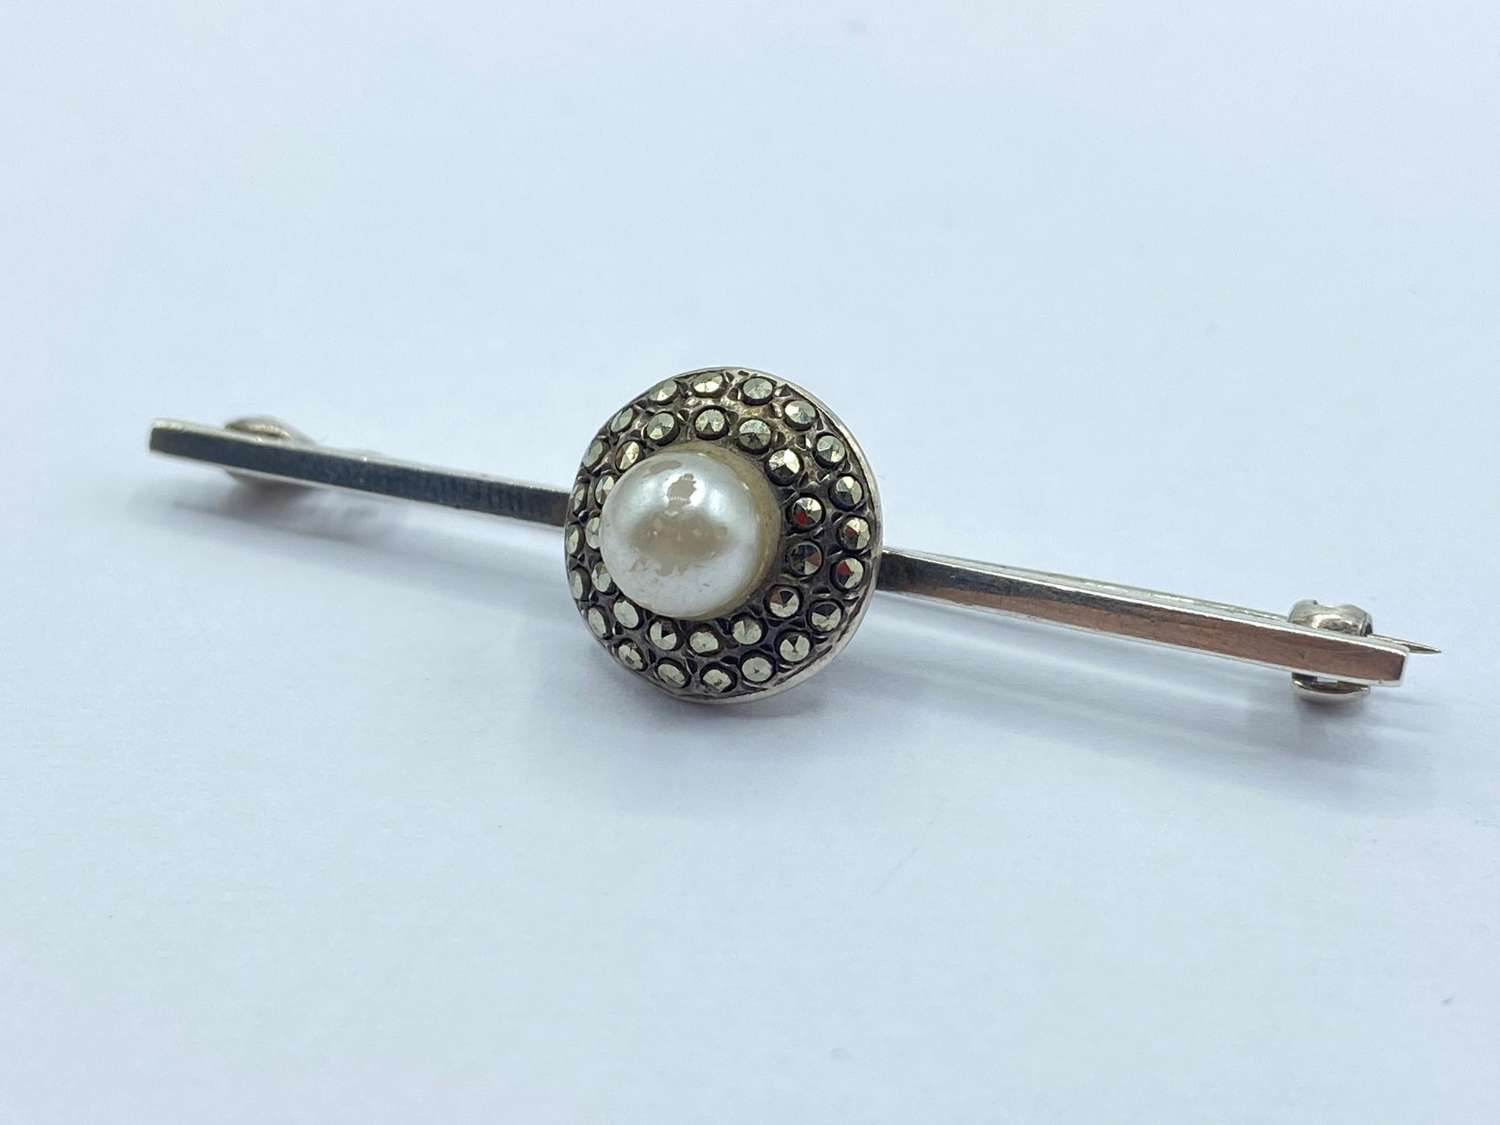 Beautiful Antique 1920s Sterling Silver, Marcasite & Faux Pearl Brooch